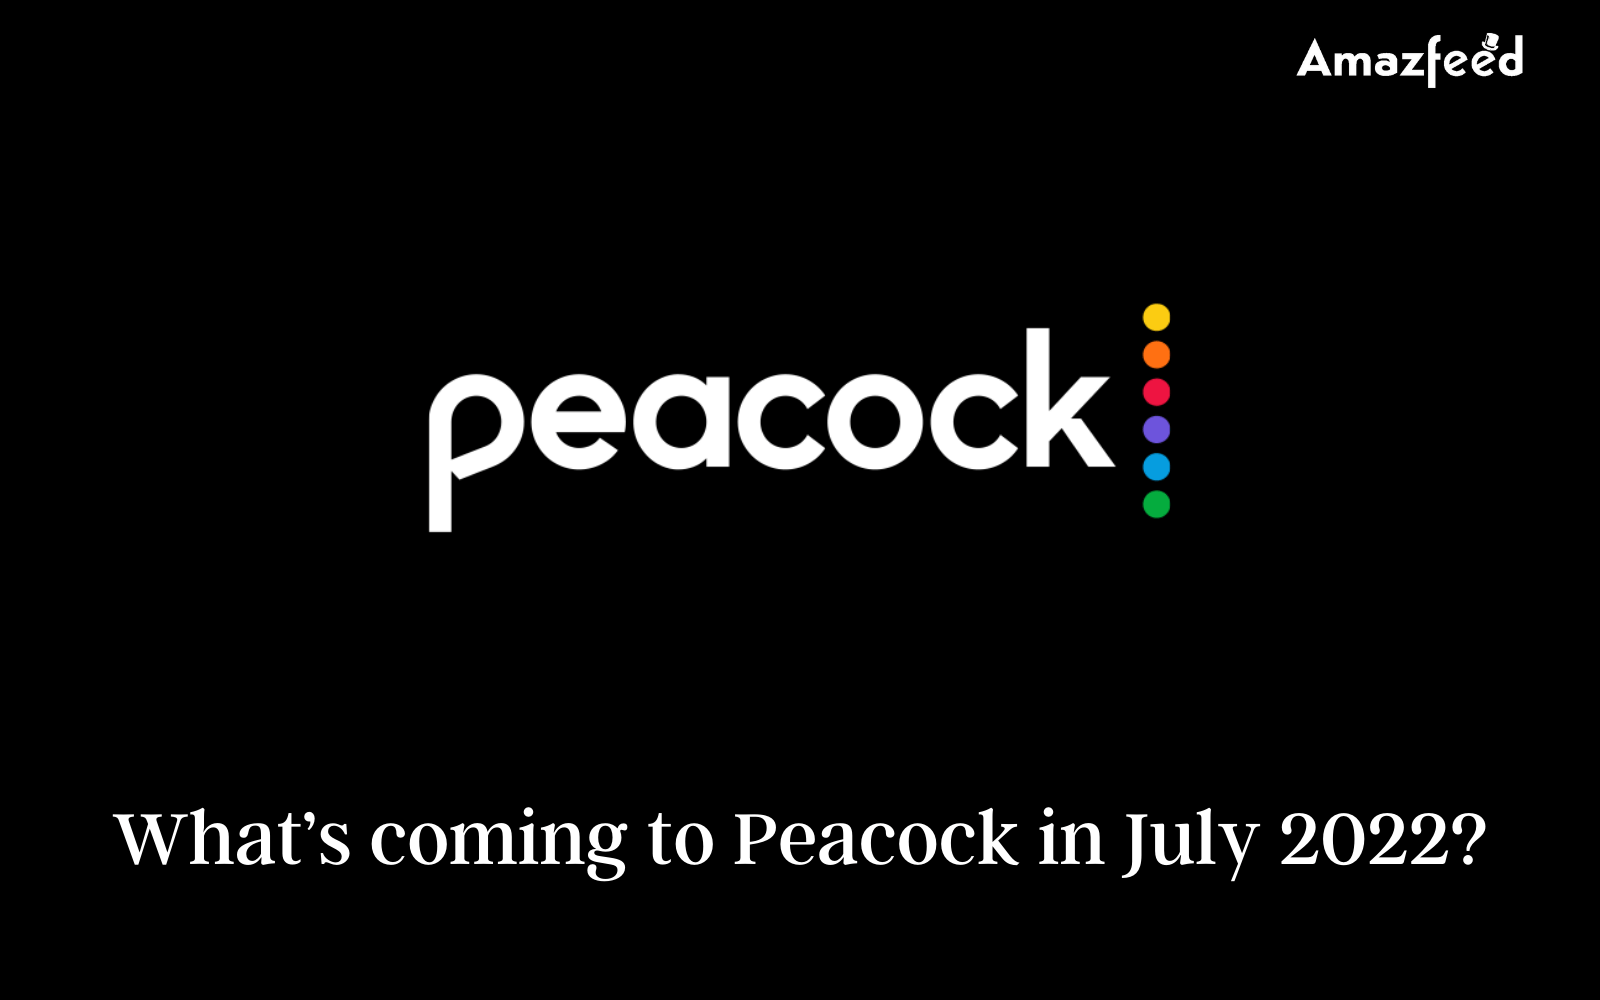 New Web Series On Peacock In July 2022 What's in store for Peacock in